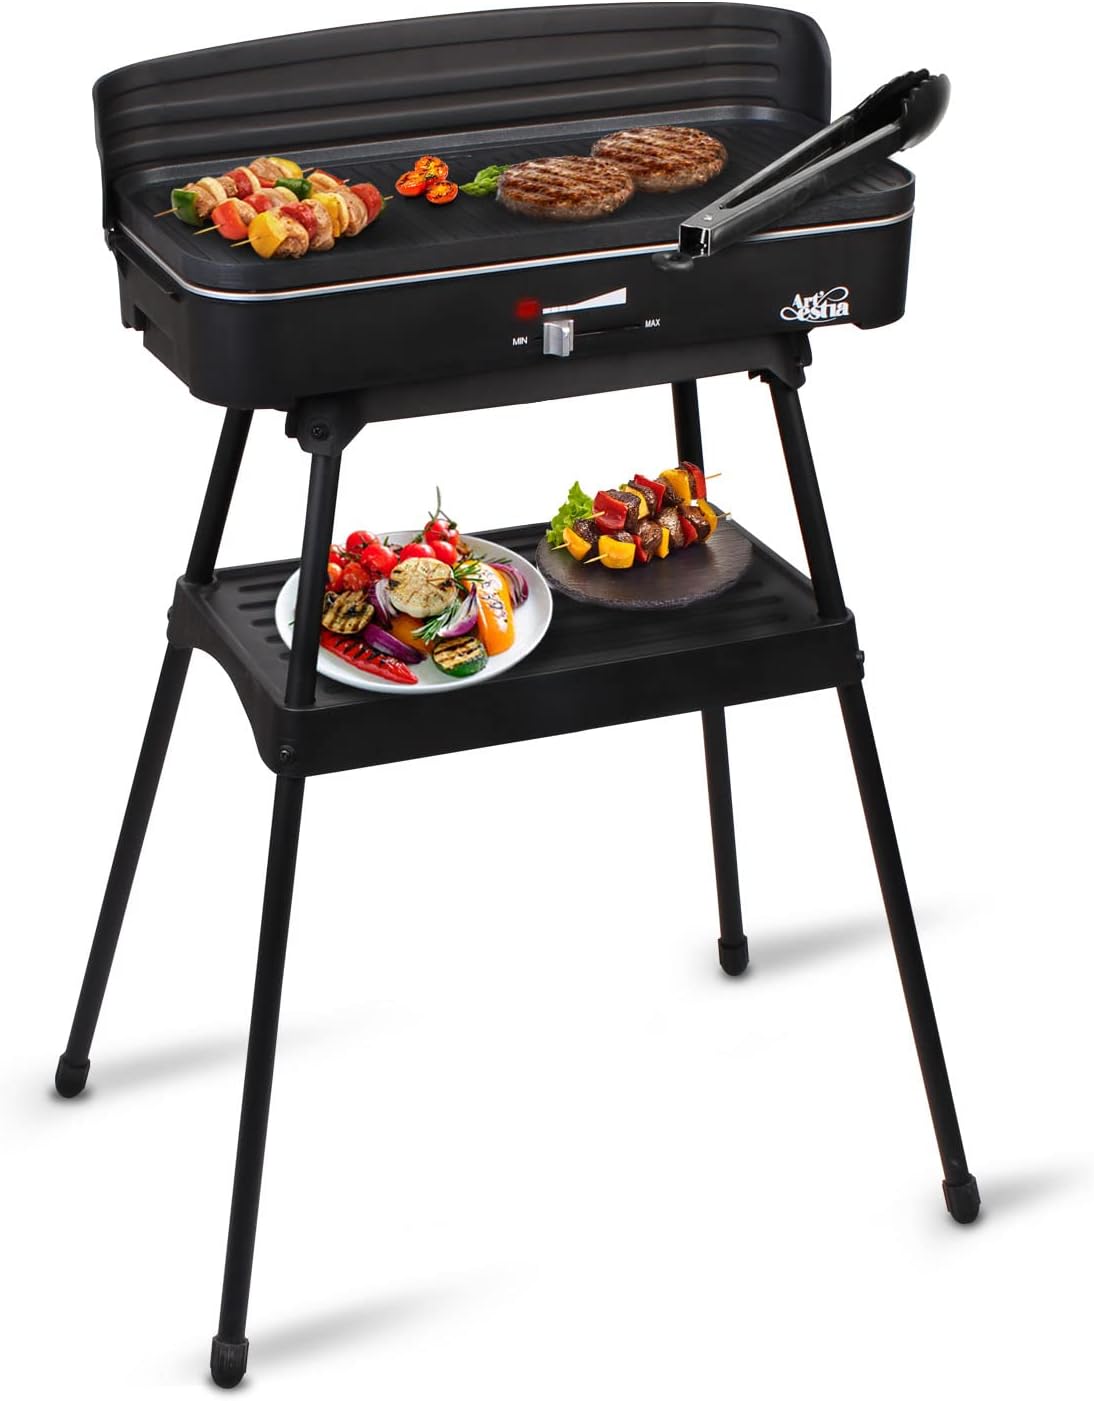 Artestia Outdoor Electric Grill Review